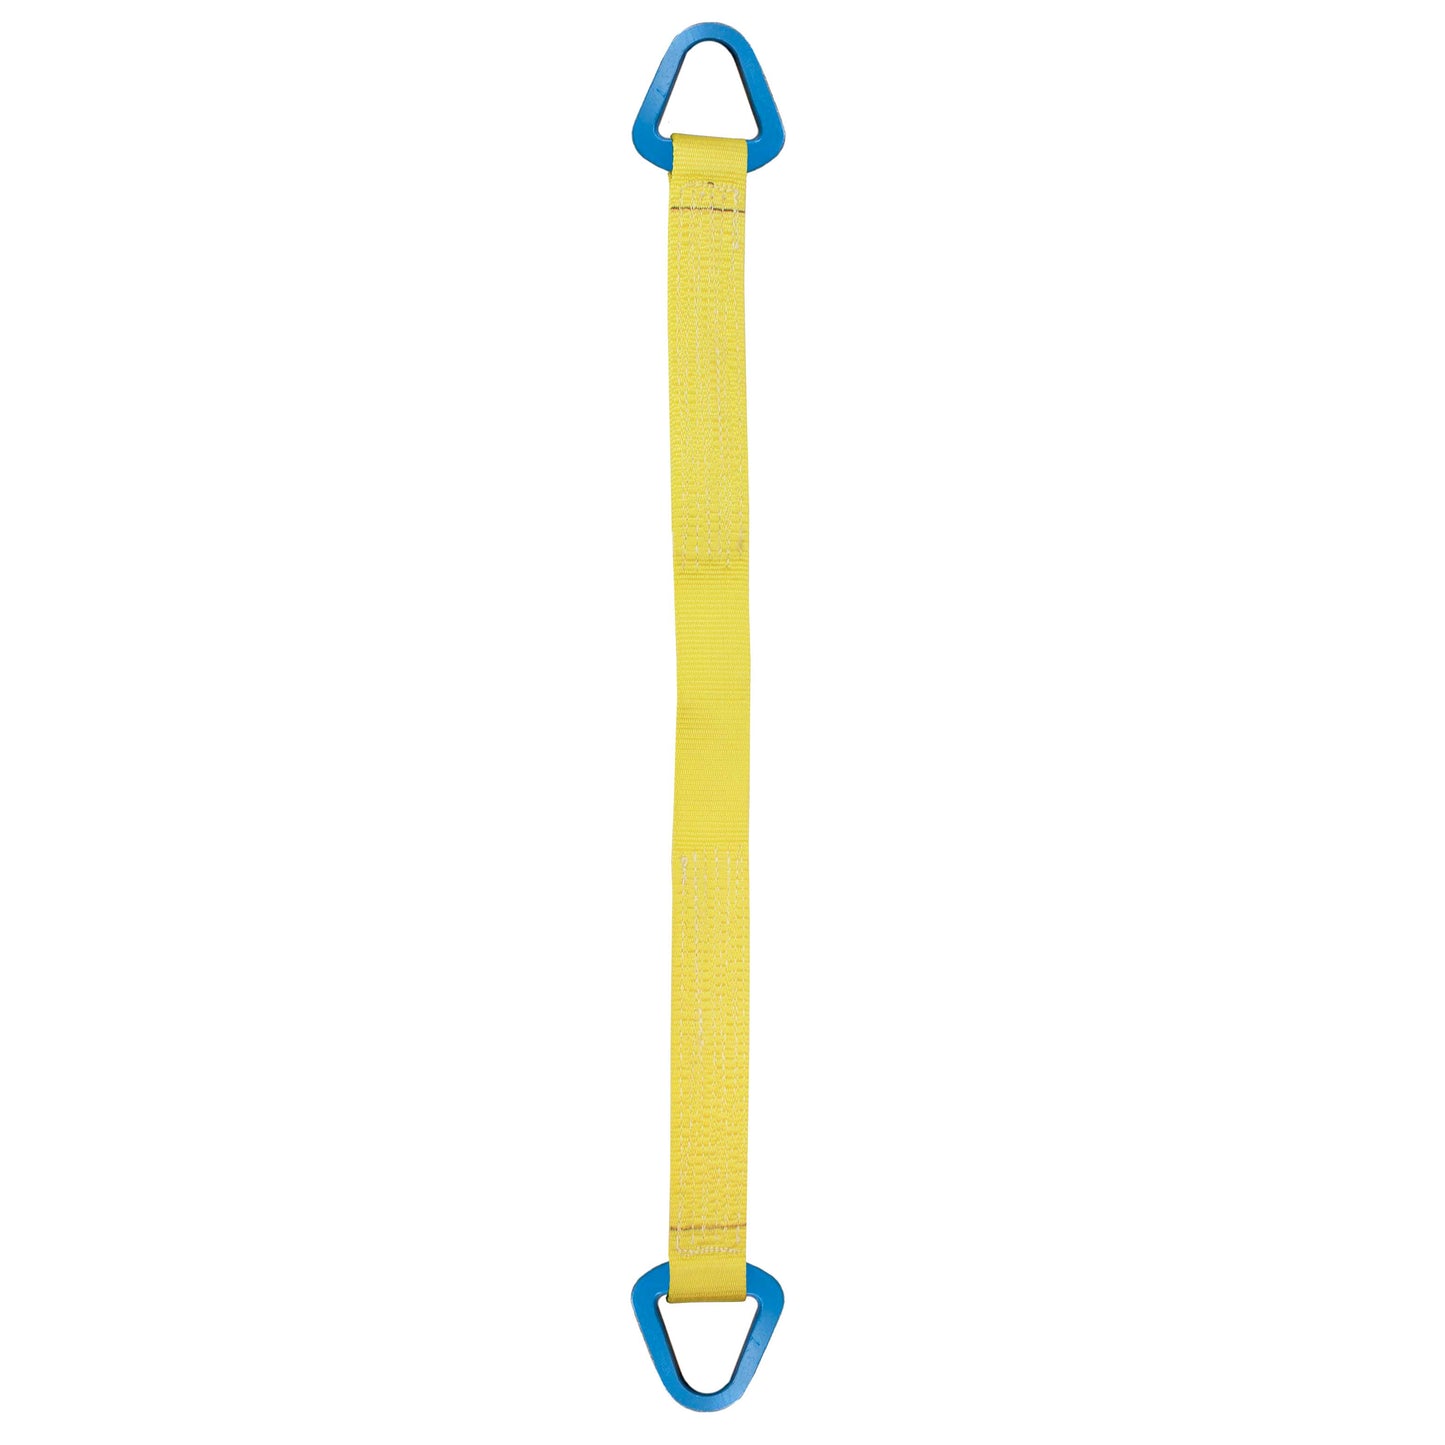 Nylon Lifting Sling Triangle 4 inch x 4 foot 2ply image 1 of 2